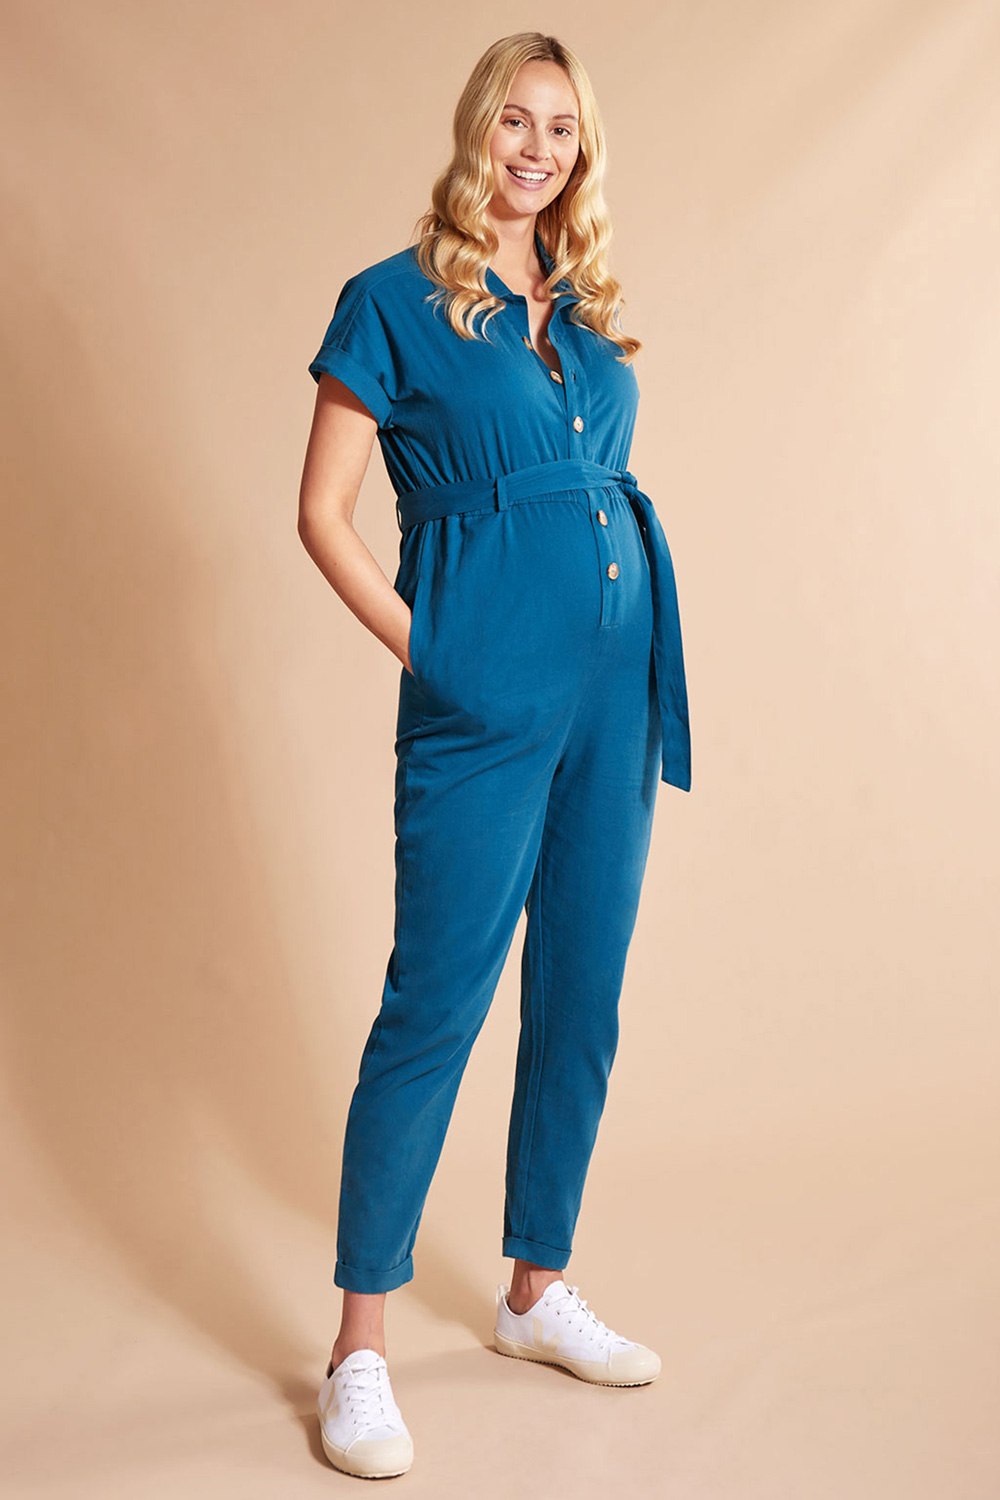 Charm Blue Bamboo Maternity Top